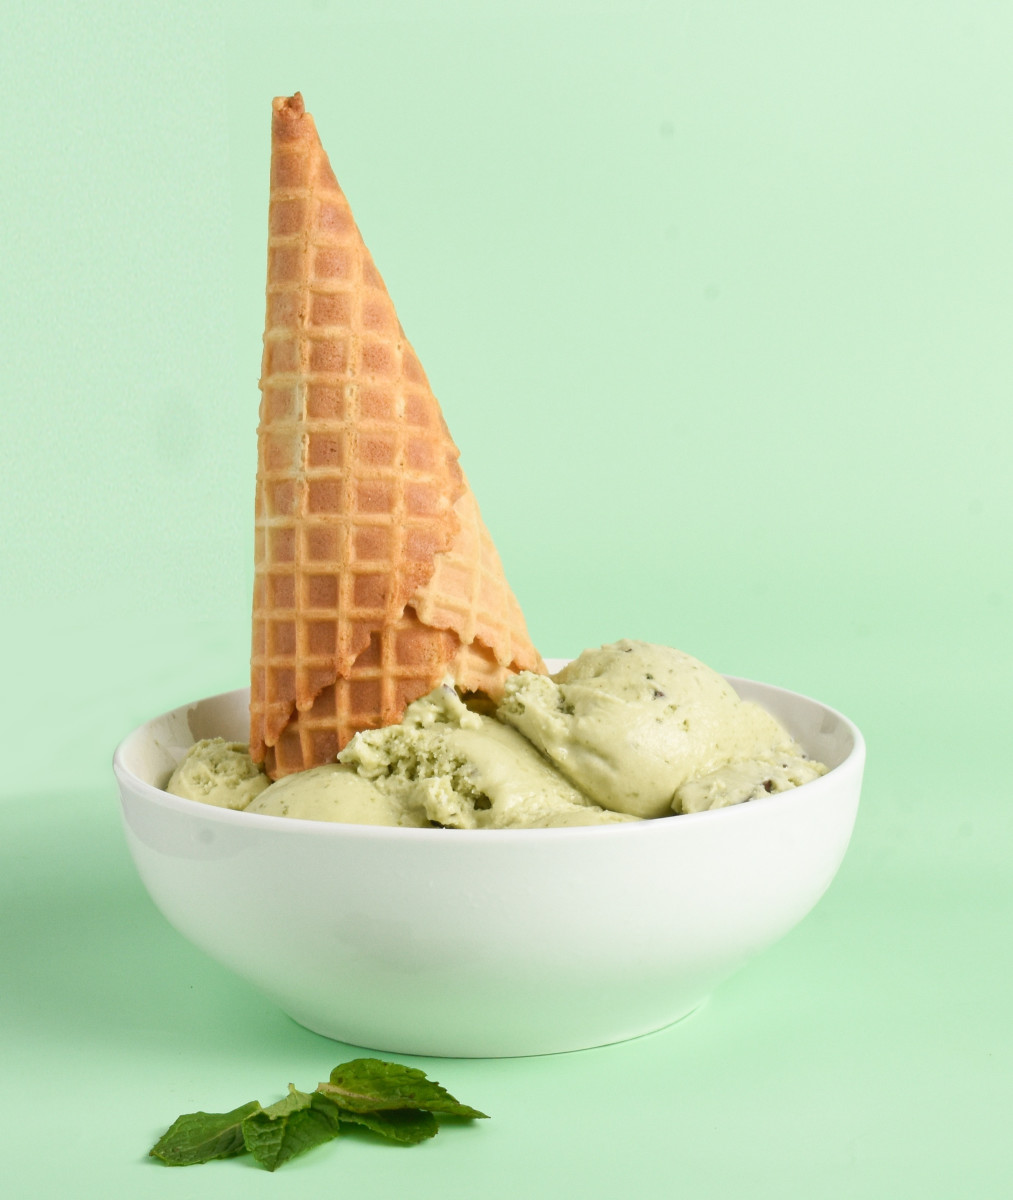 A scoop of MINT CHIP